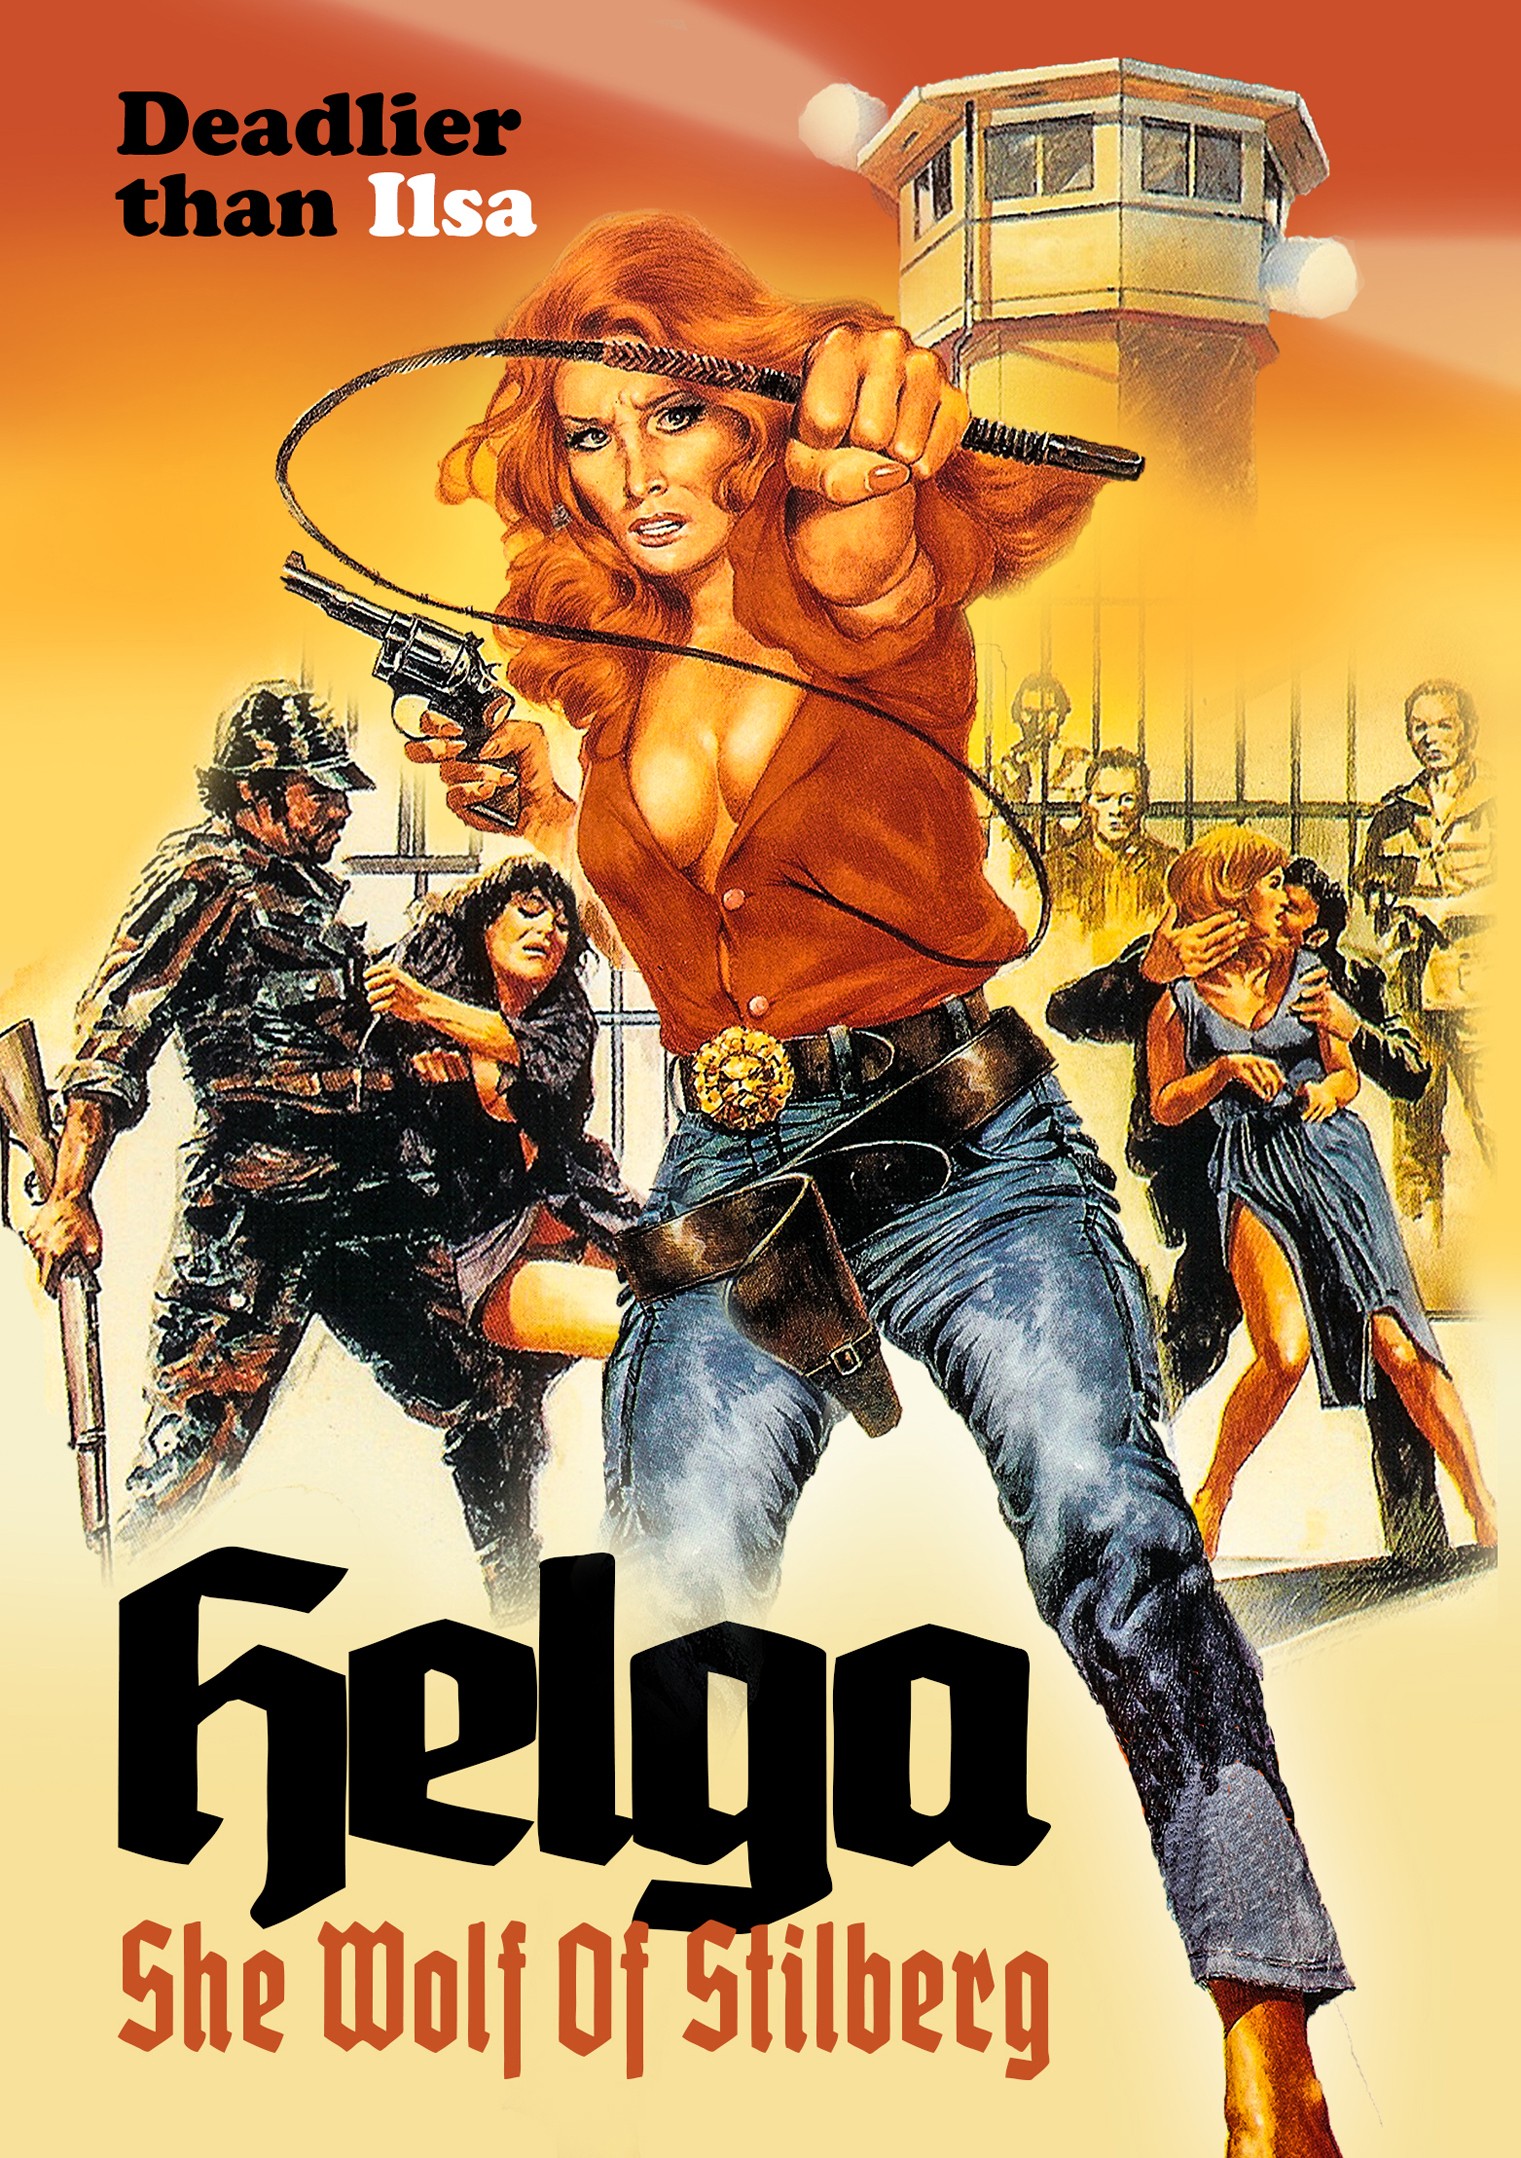 18+Helga She Wolf of Spilberg 1977 French 720p HDRip 850MB Download